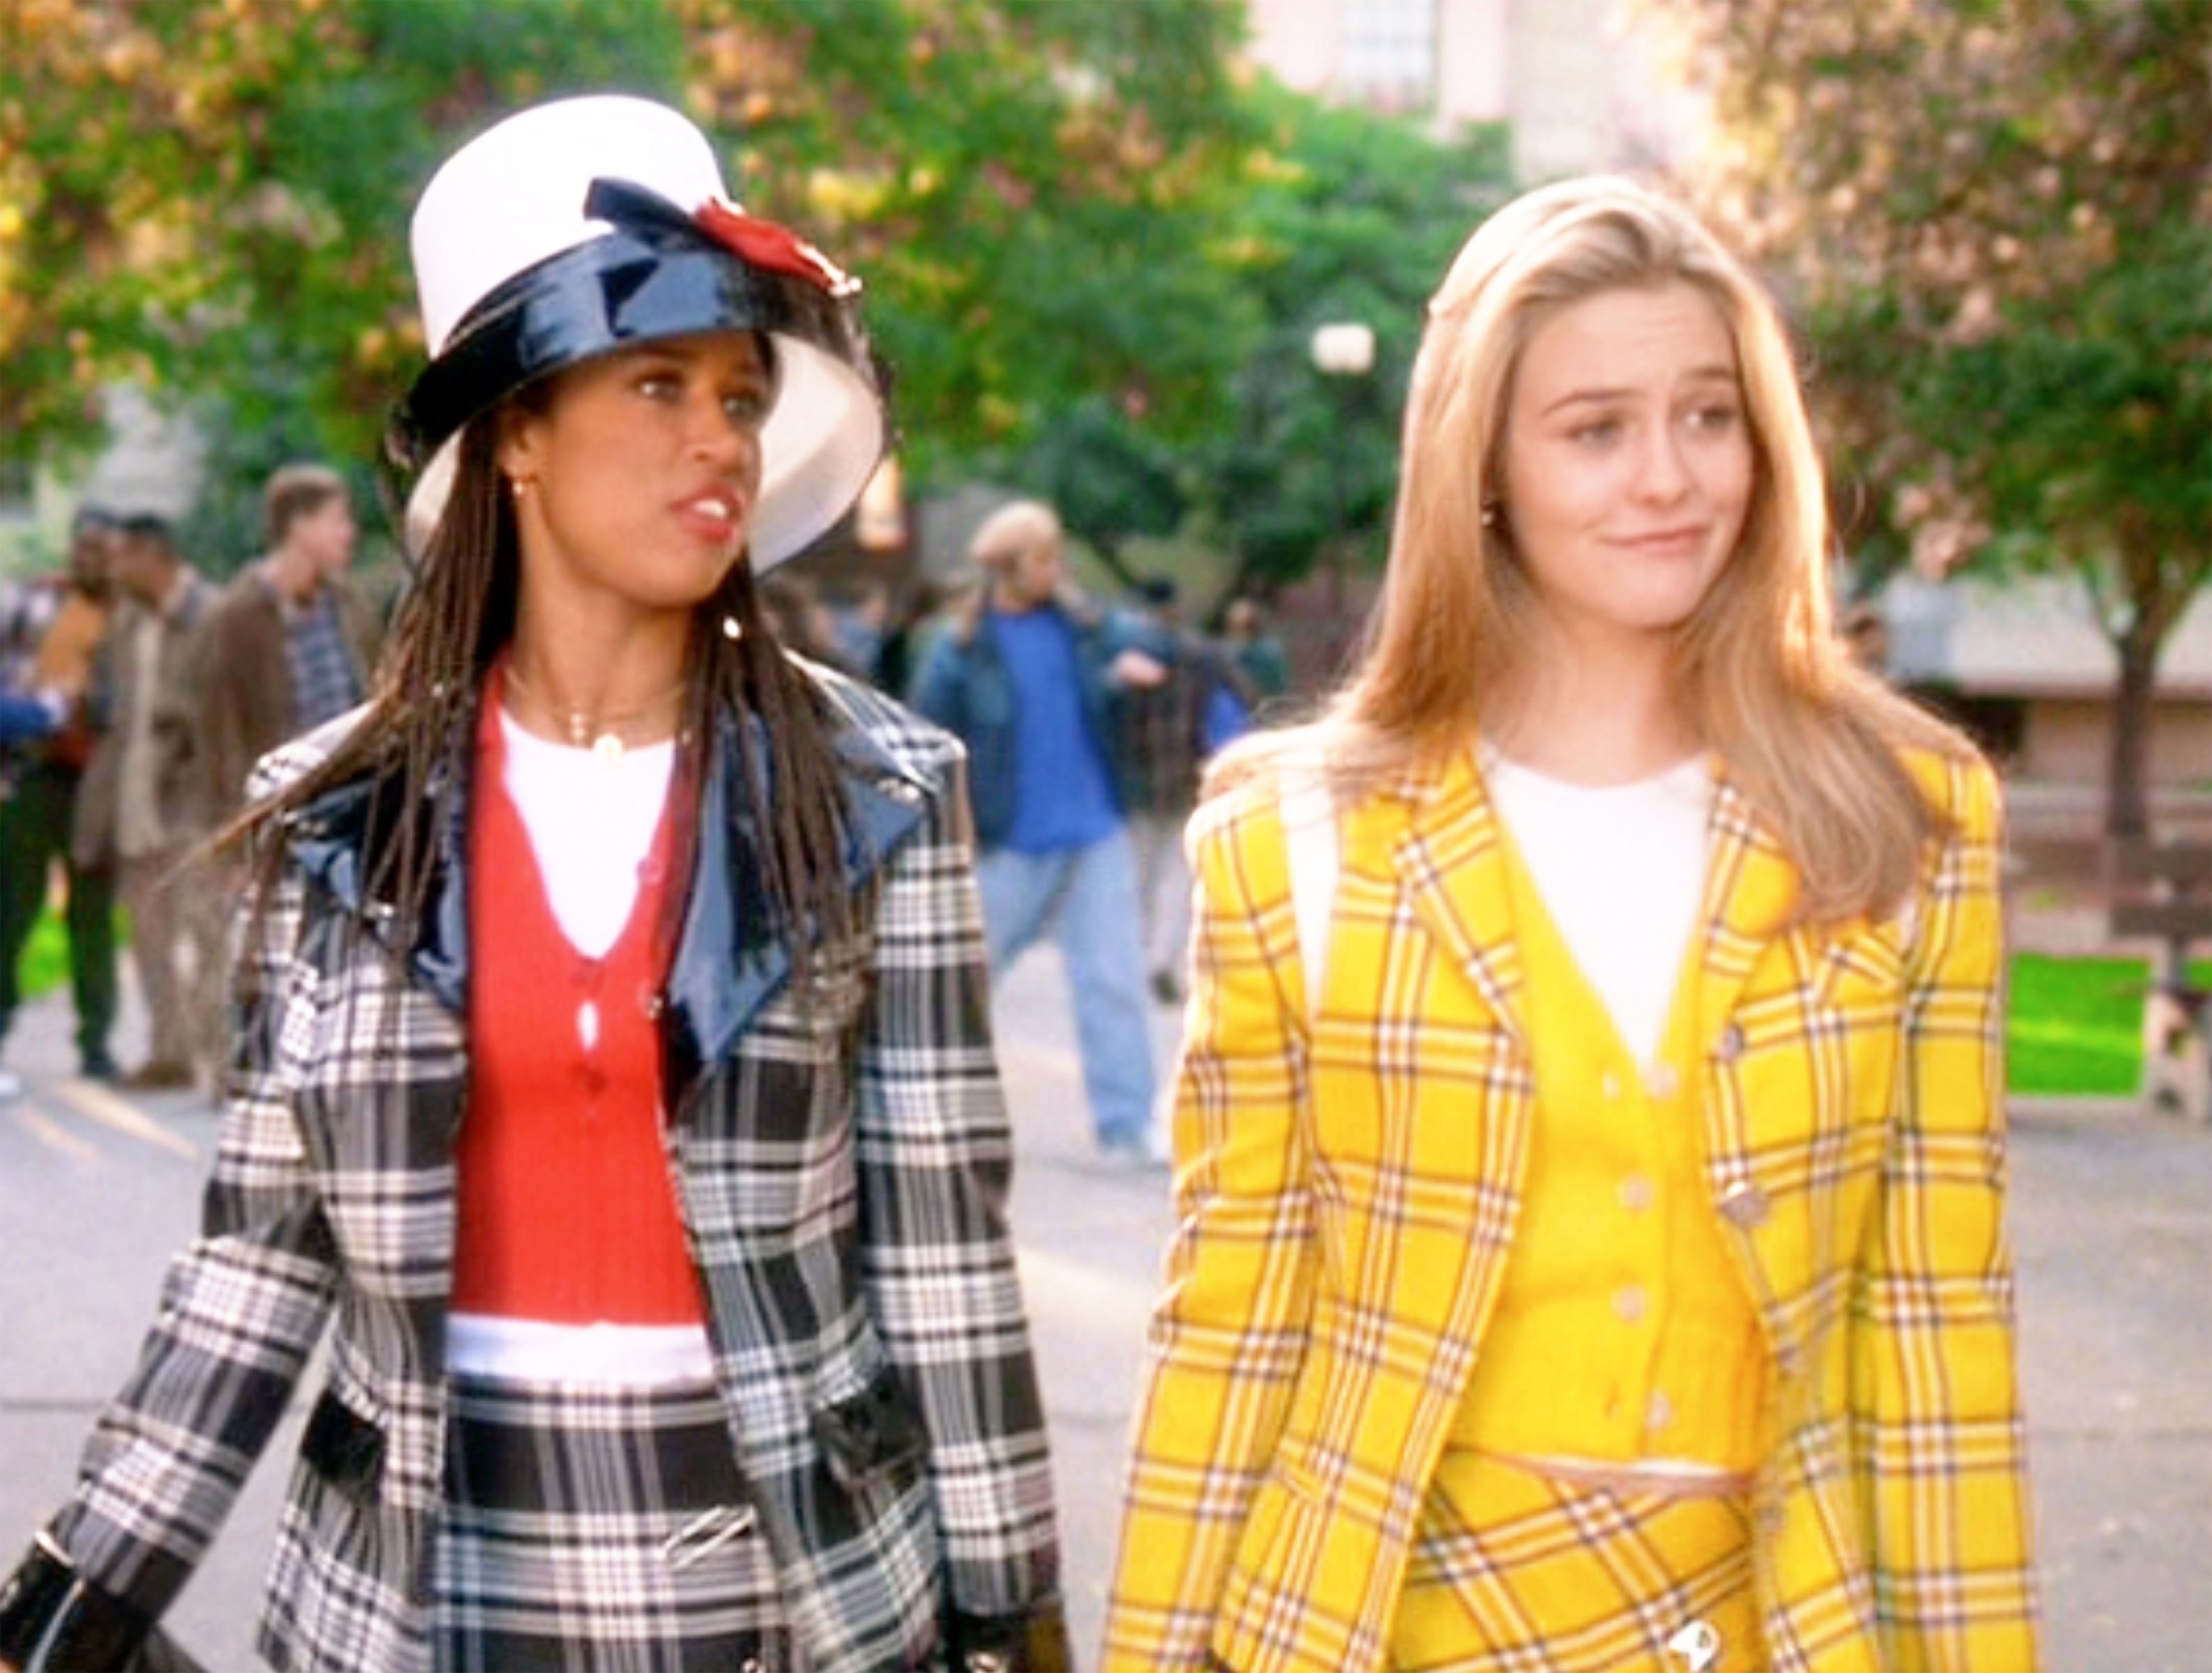 Things Movies Always Get Wrong - clueless cast